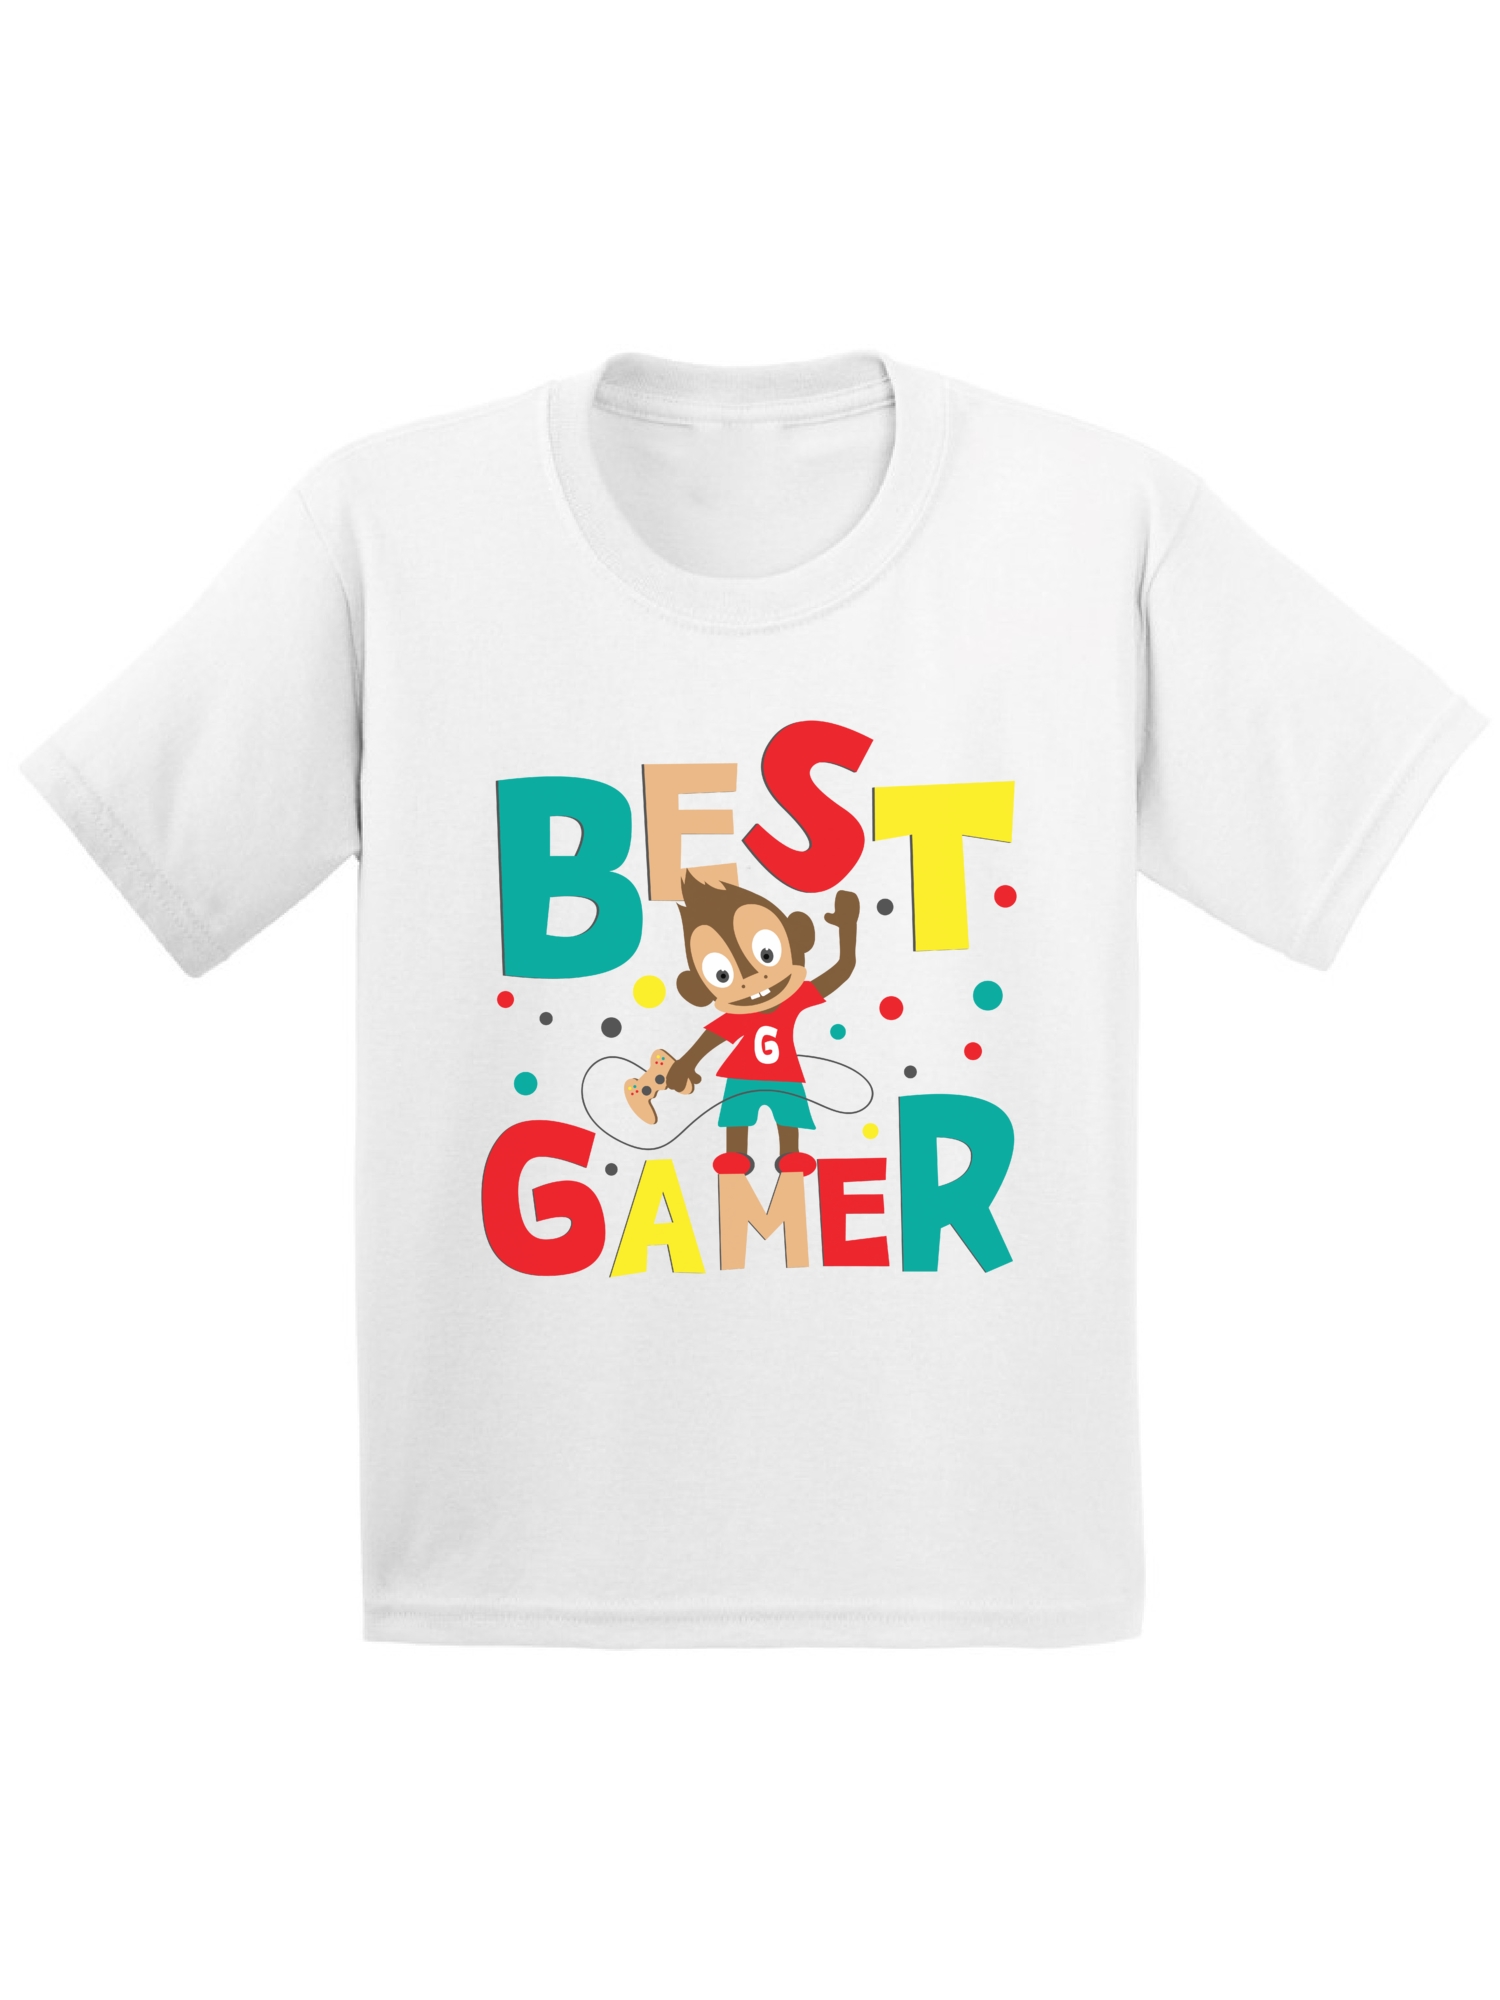 Awkward Styles Best Gamer Toddler Shirt Funny Birthday Gifts Gaming Tshirts for Kids Themed Party Boys Video Game Birthday Shirts Cute Gifts for Boys Funny Monkey Gamer T shirts - image 1 of 4